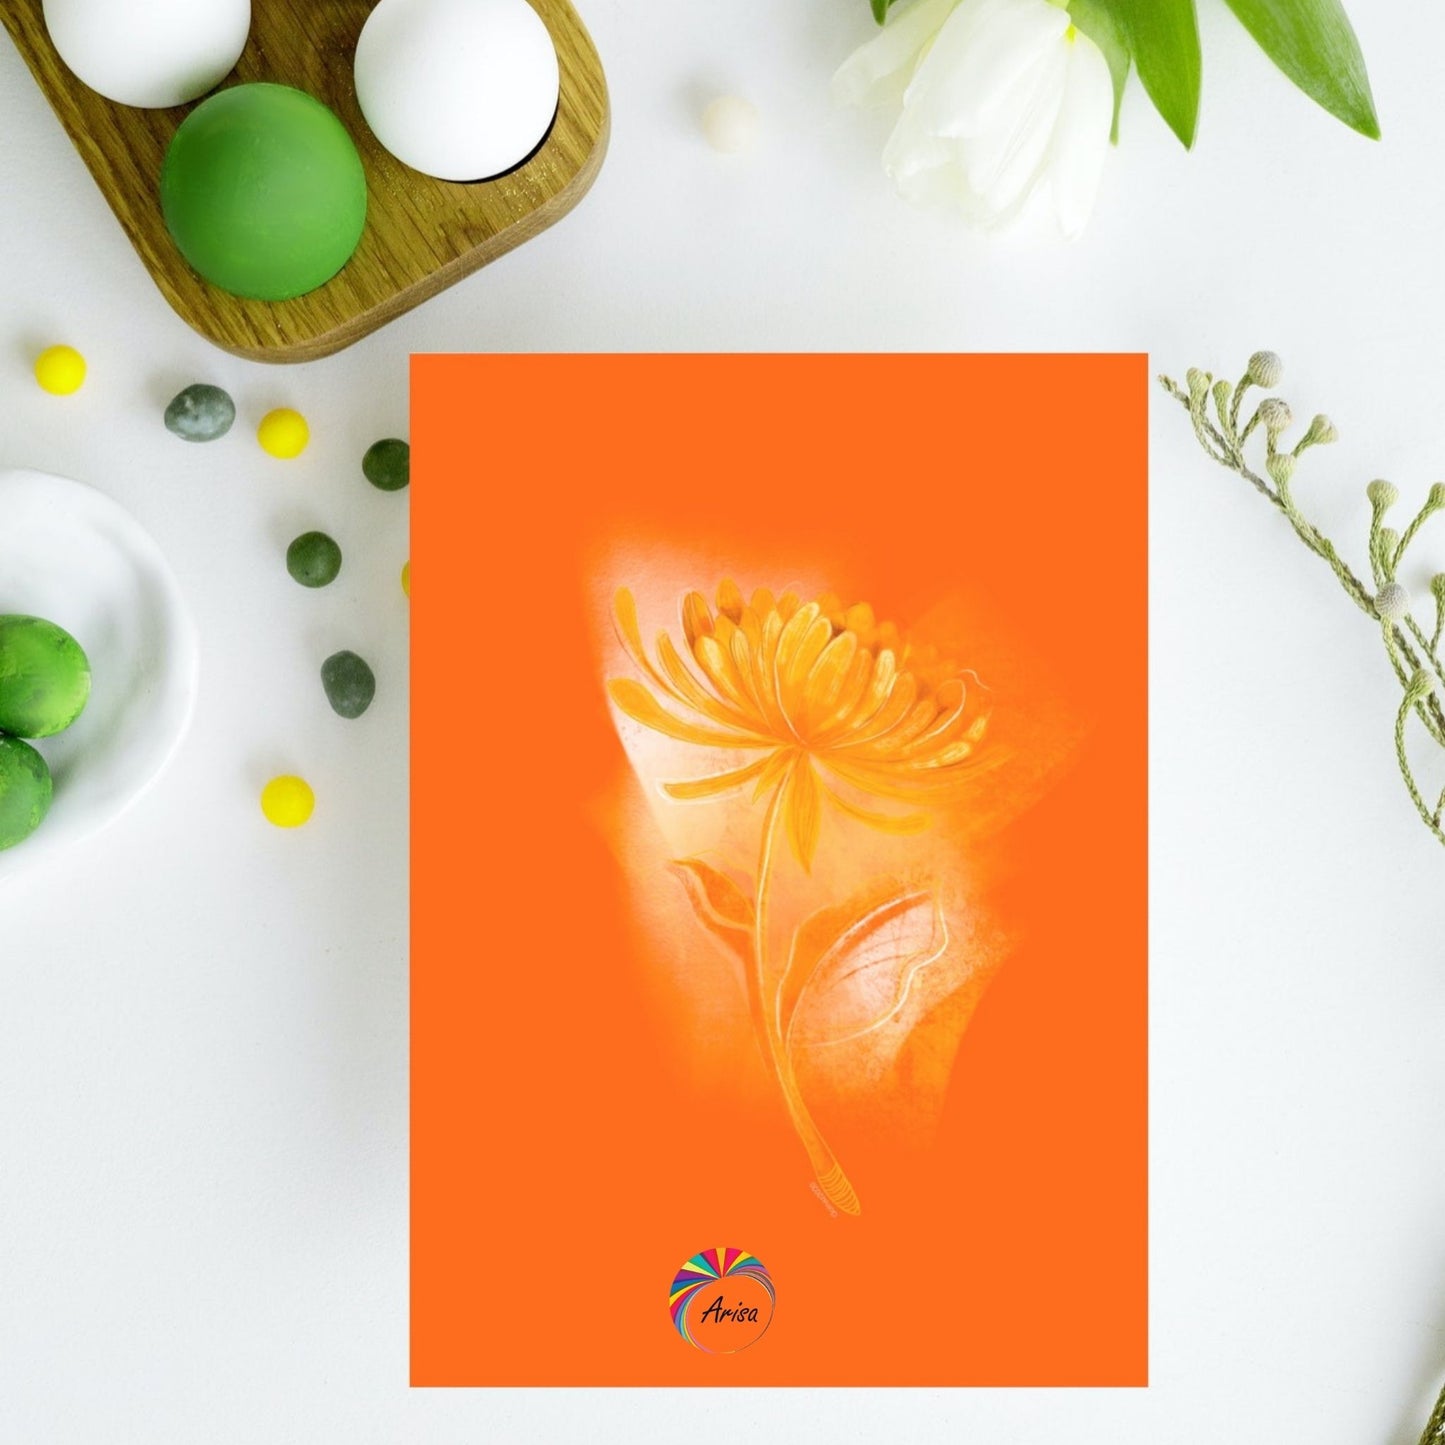 "Chrysanthemum" Greeting Card by ArisaTeam next to eggs ideal as an Easter card.